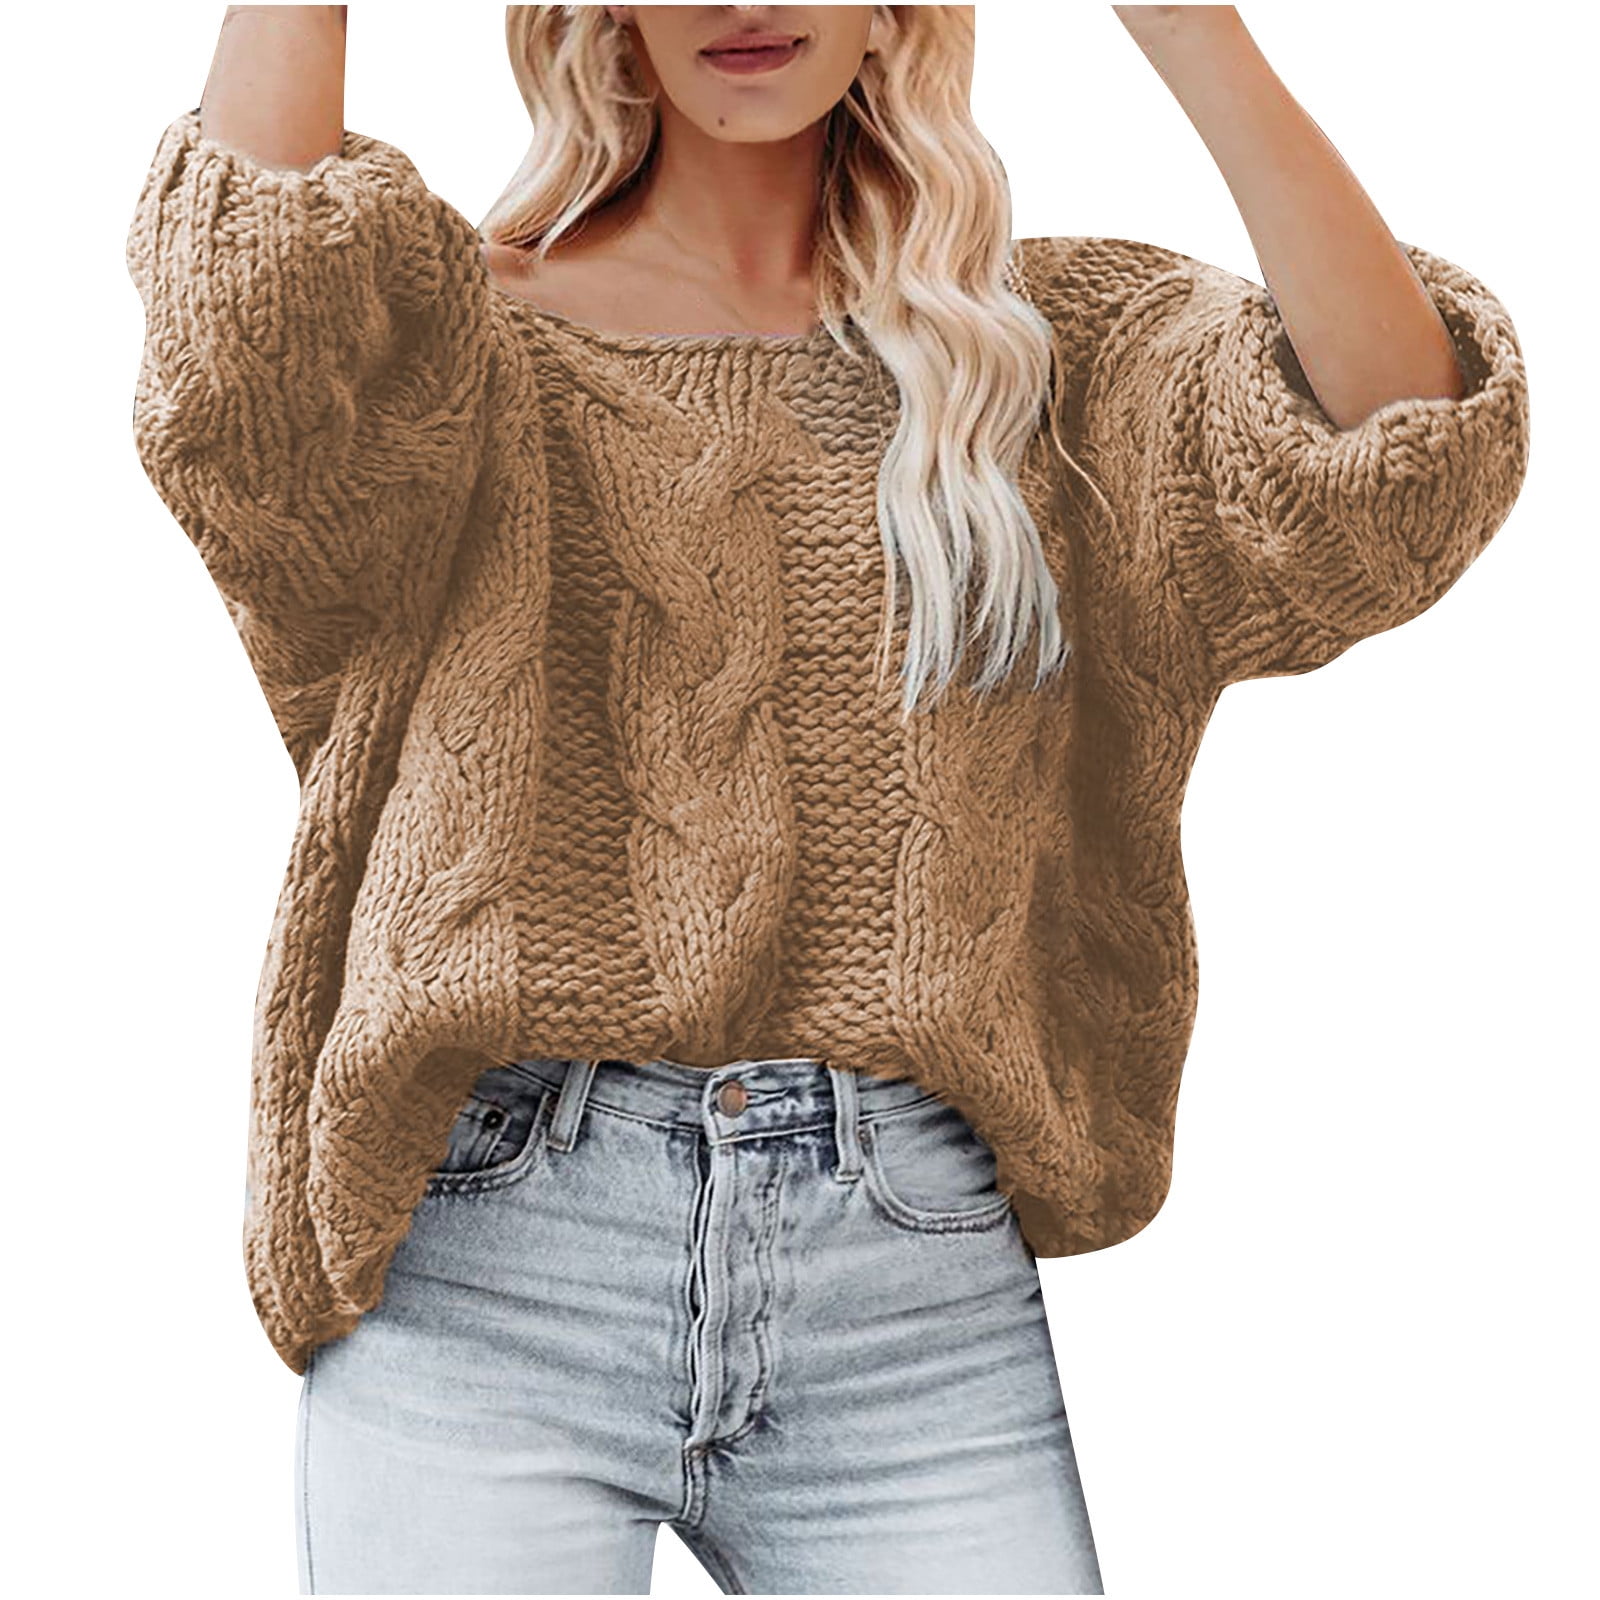 Hfyihgf Womens Oversized Sweater Long Sleeve Sexy Off Shoulder Pullover  Sweaters Batwing Sleeve Cable Knit Slouchy Tops(Khaki,L)